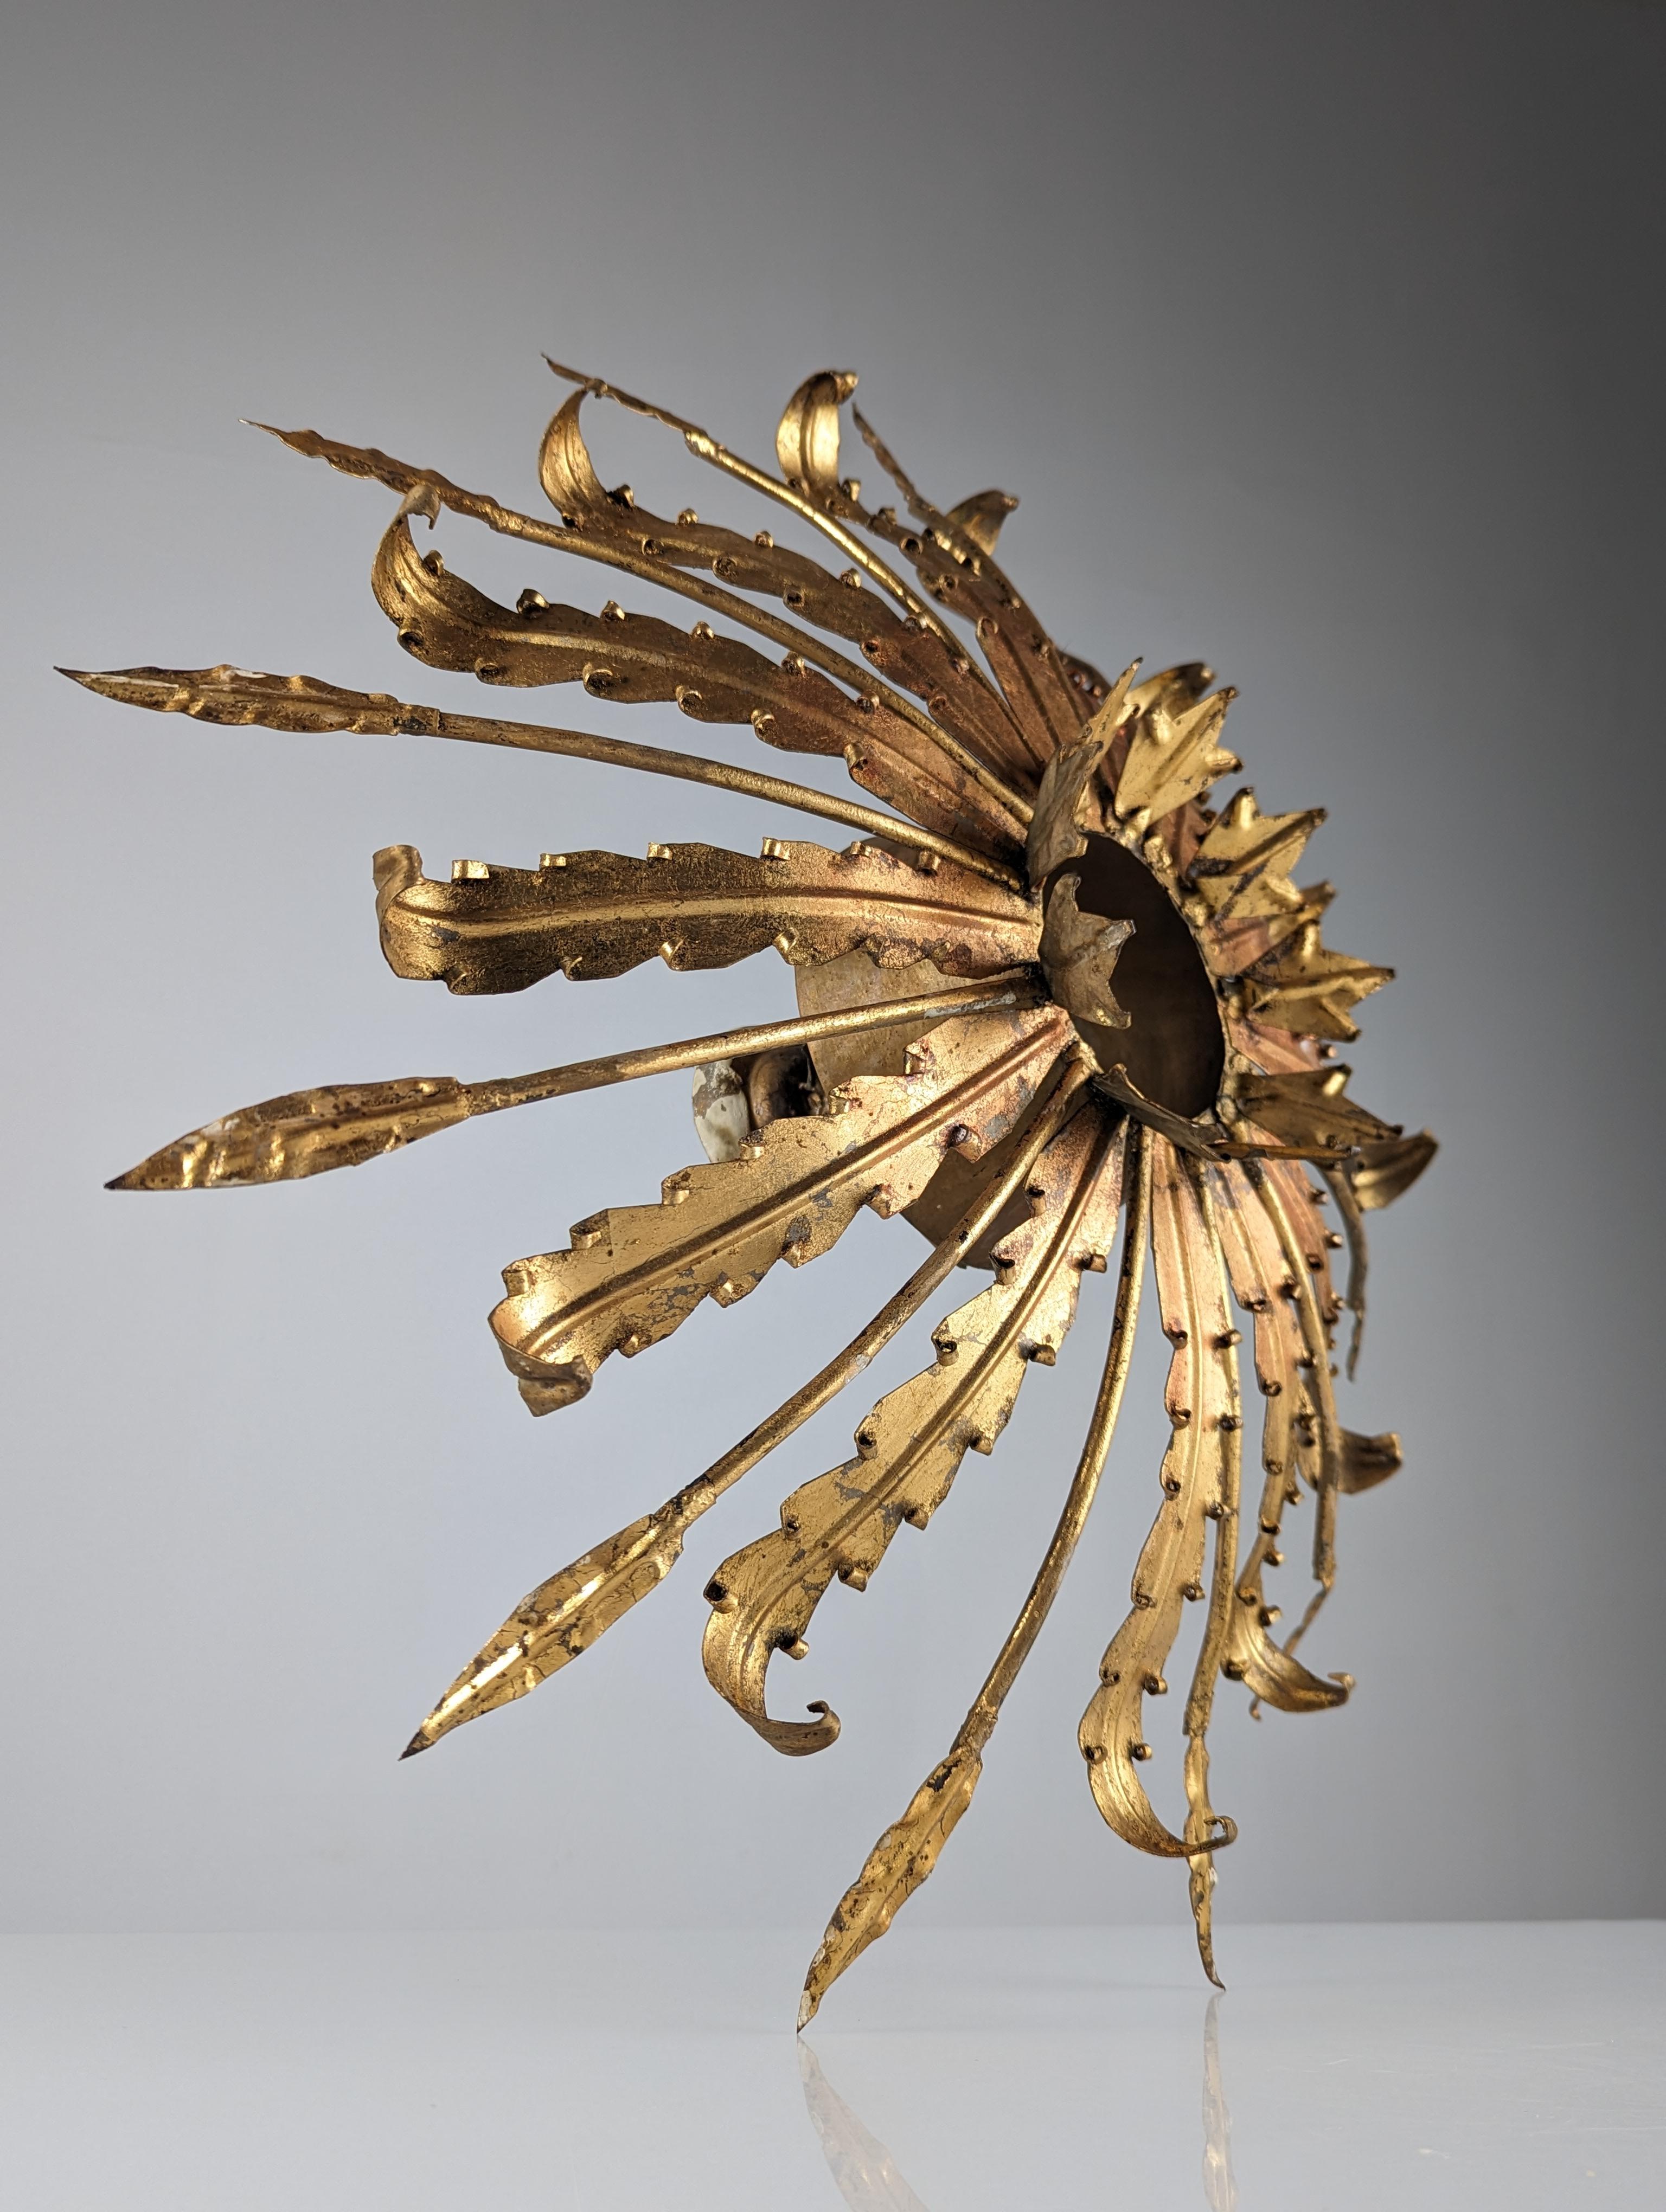 Monumental sun ceiling lamp from the 1950s made of gold metal, its rays in the shape of wide leaves and elegant thin interspersed leaves create a beautiful combination. It has three light points, one of them central designed to place a globe or